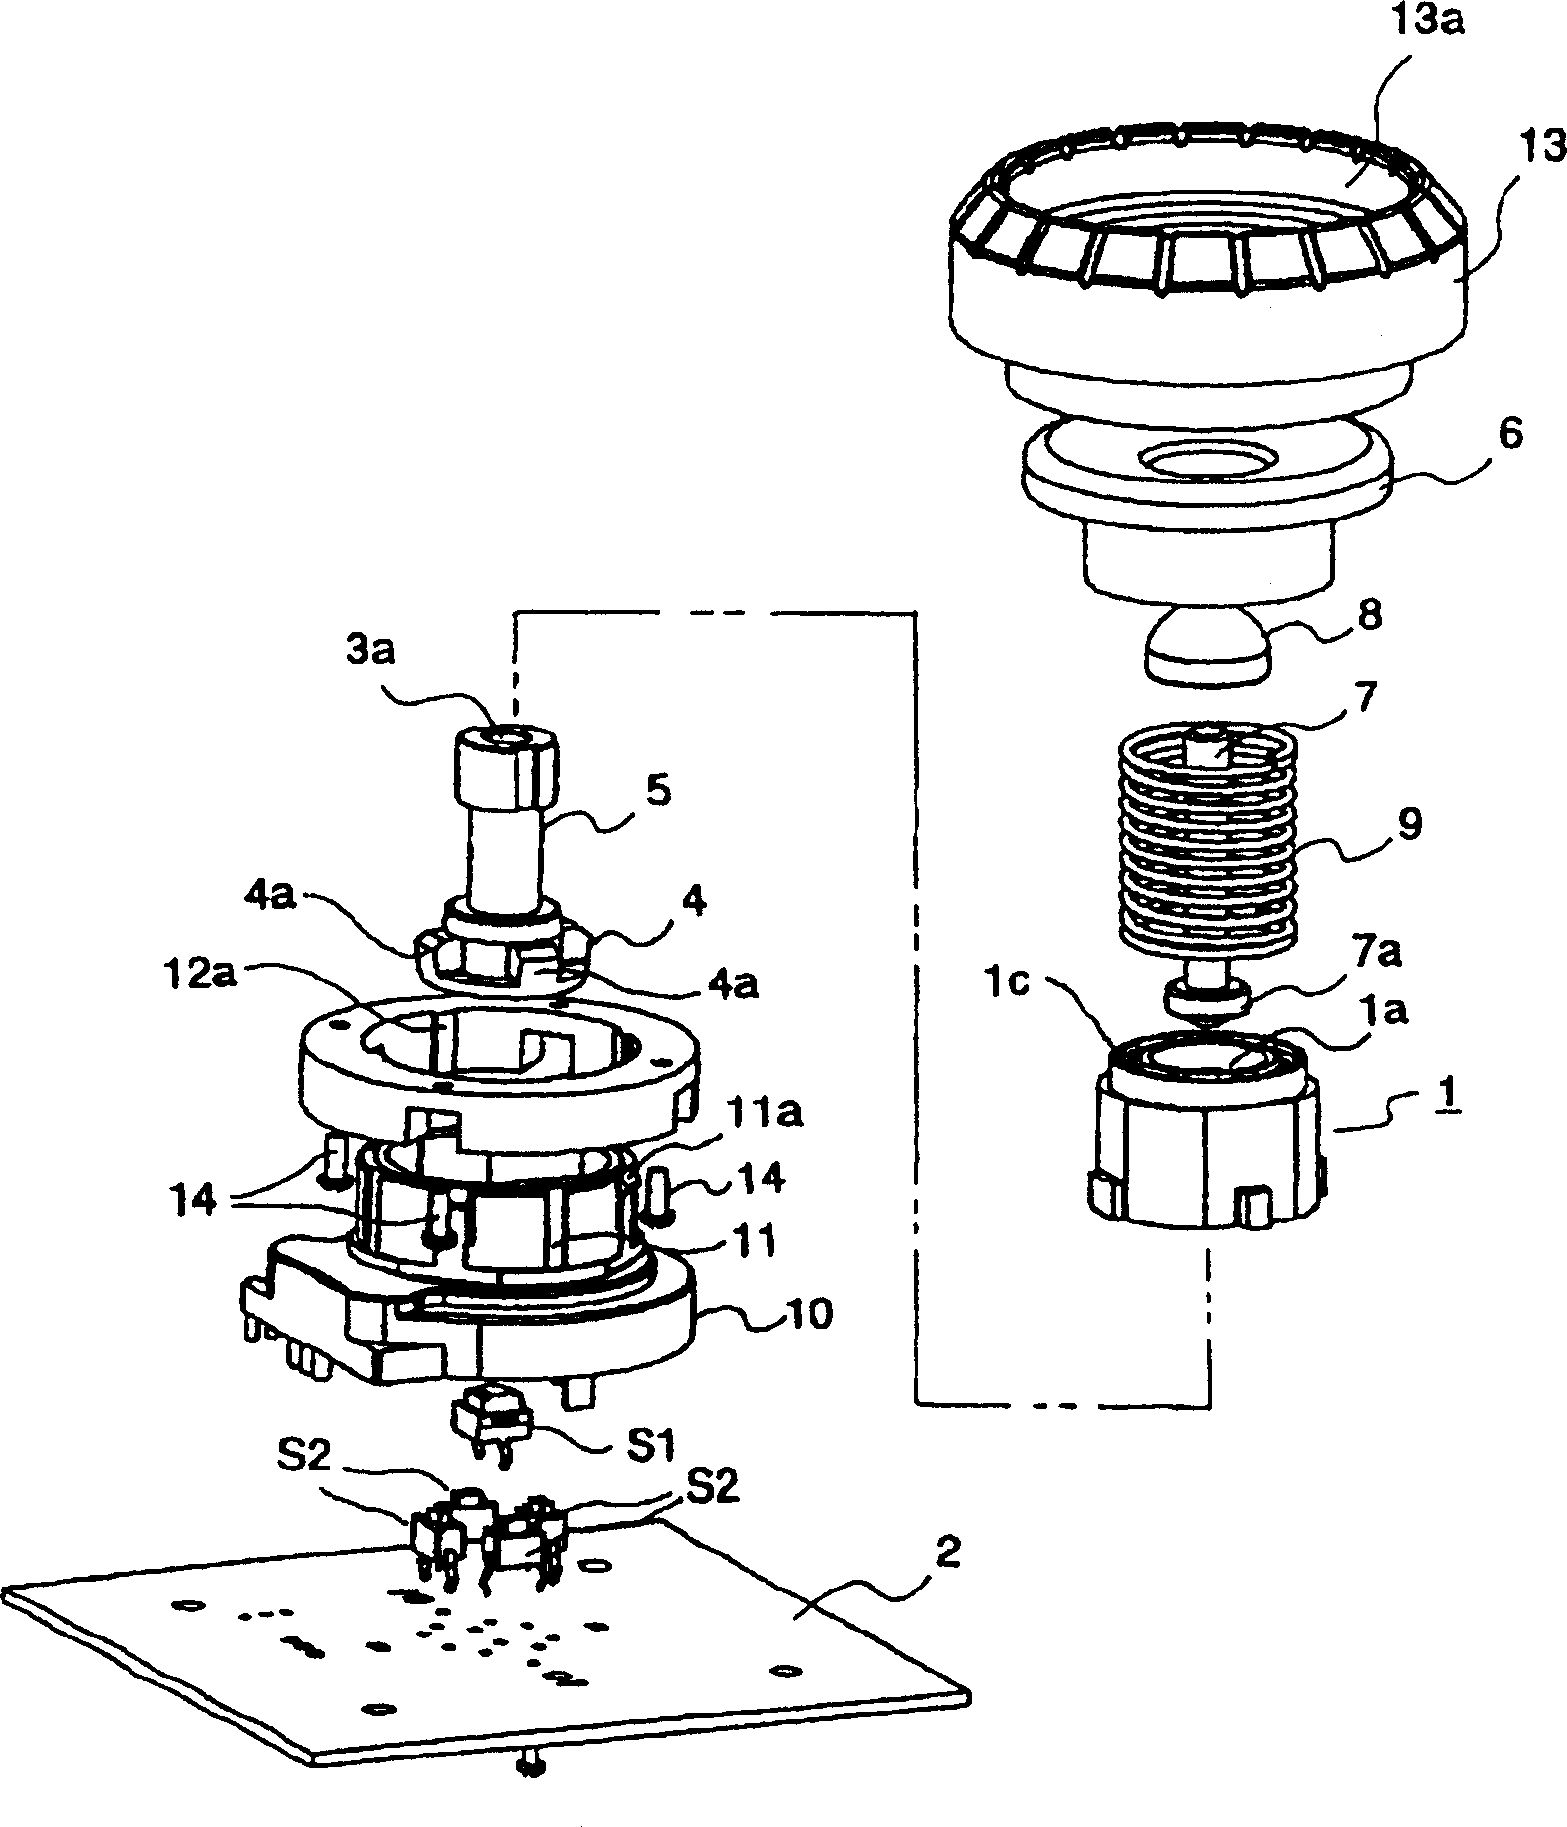 Multii-directional input device